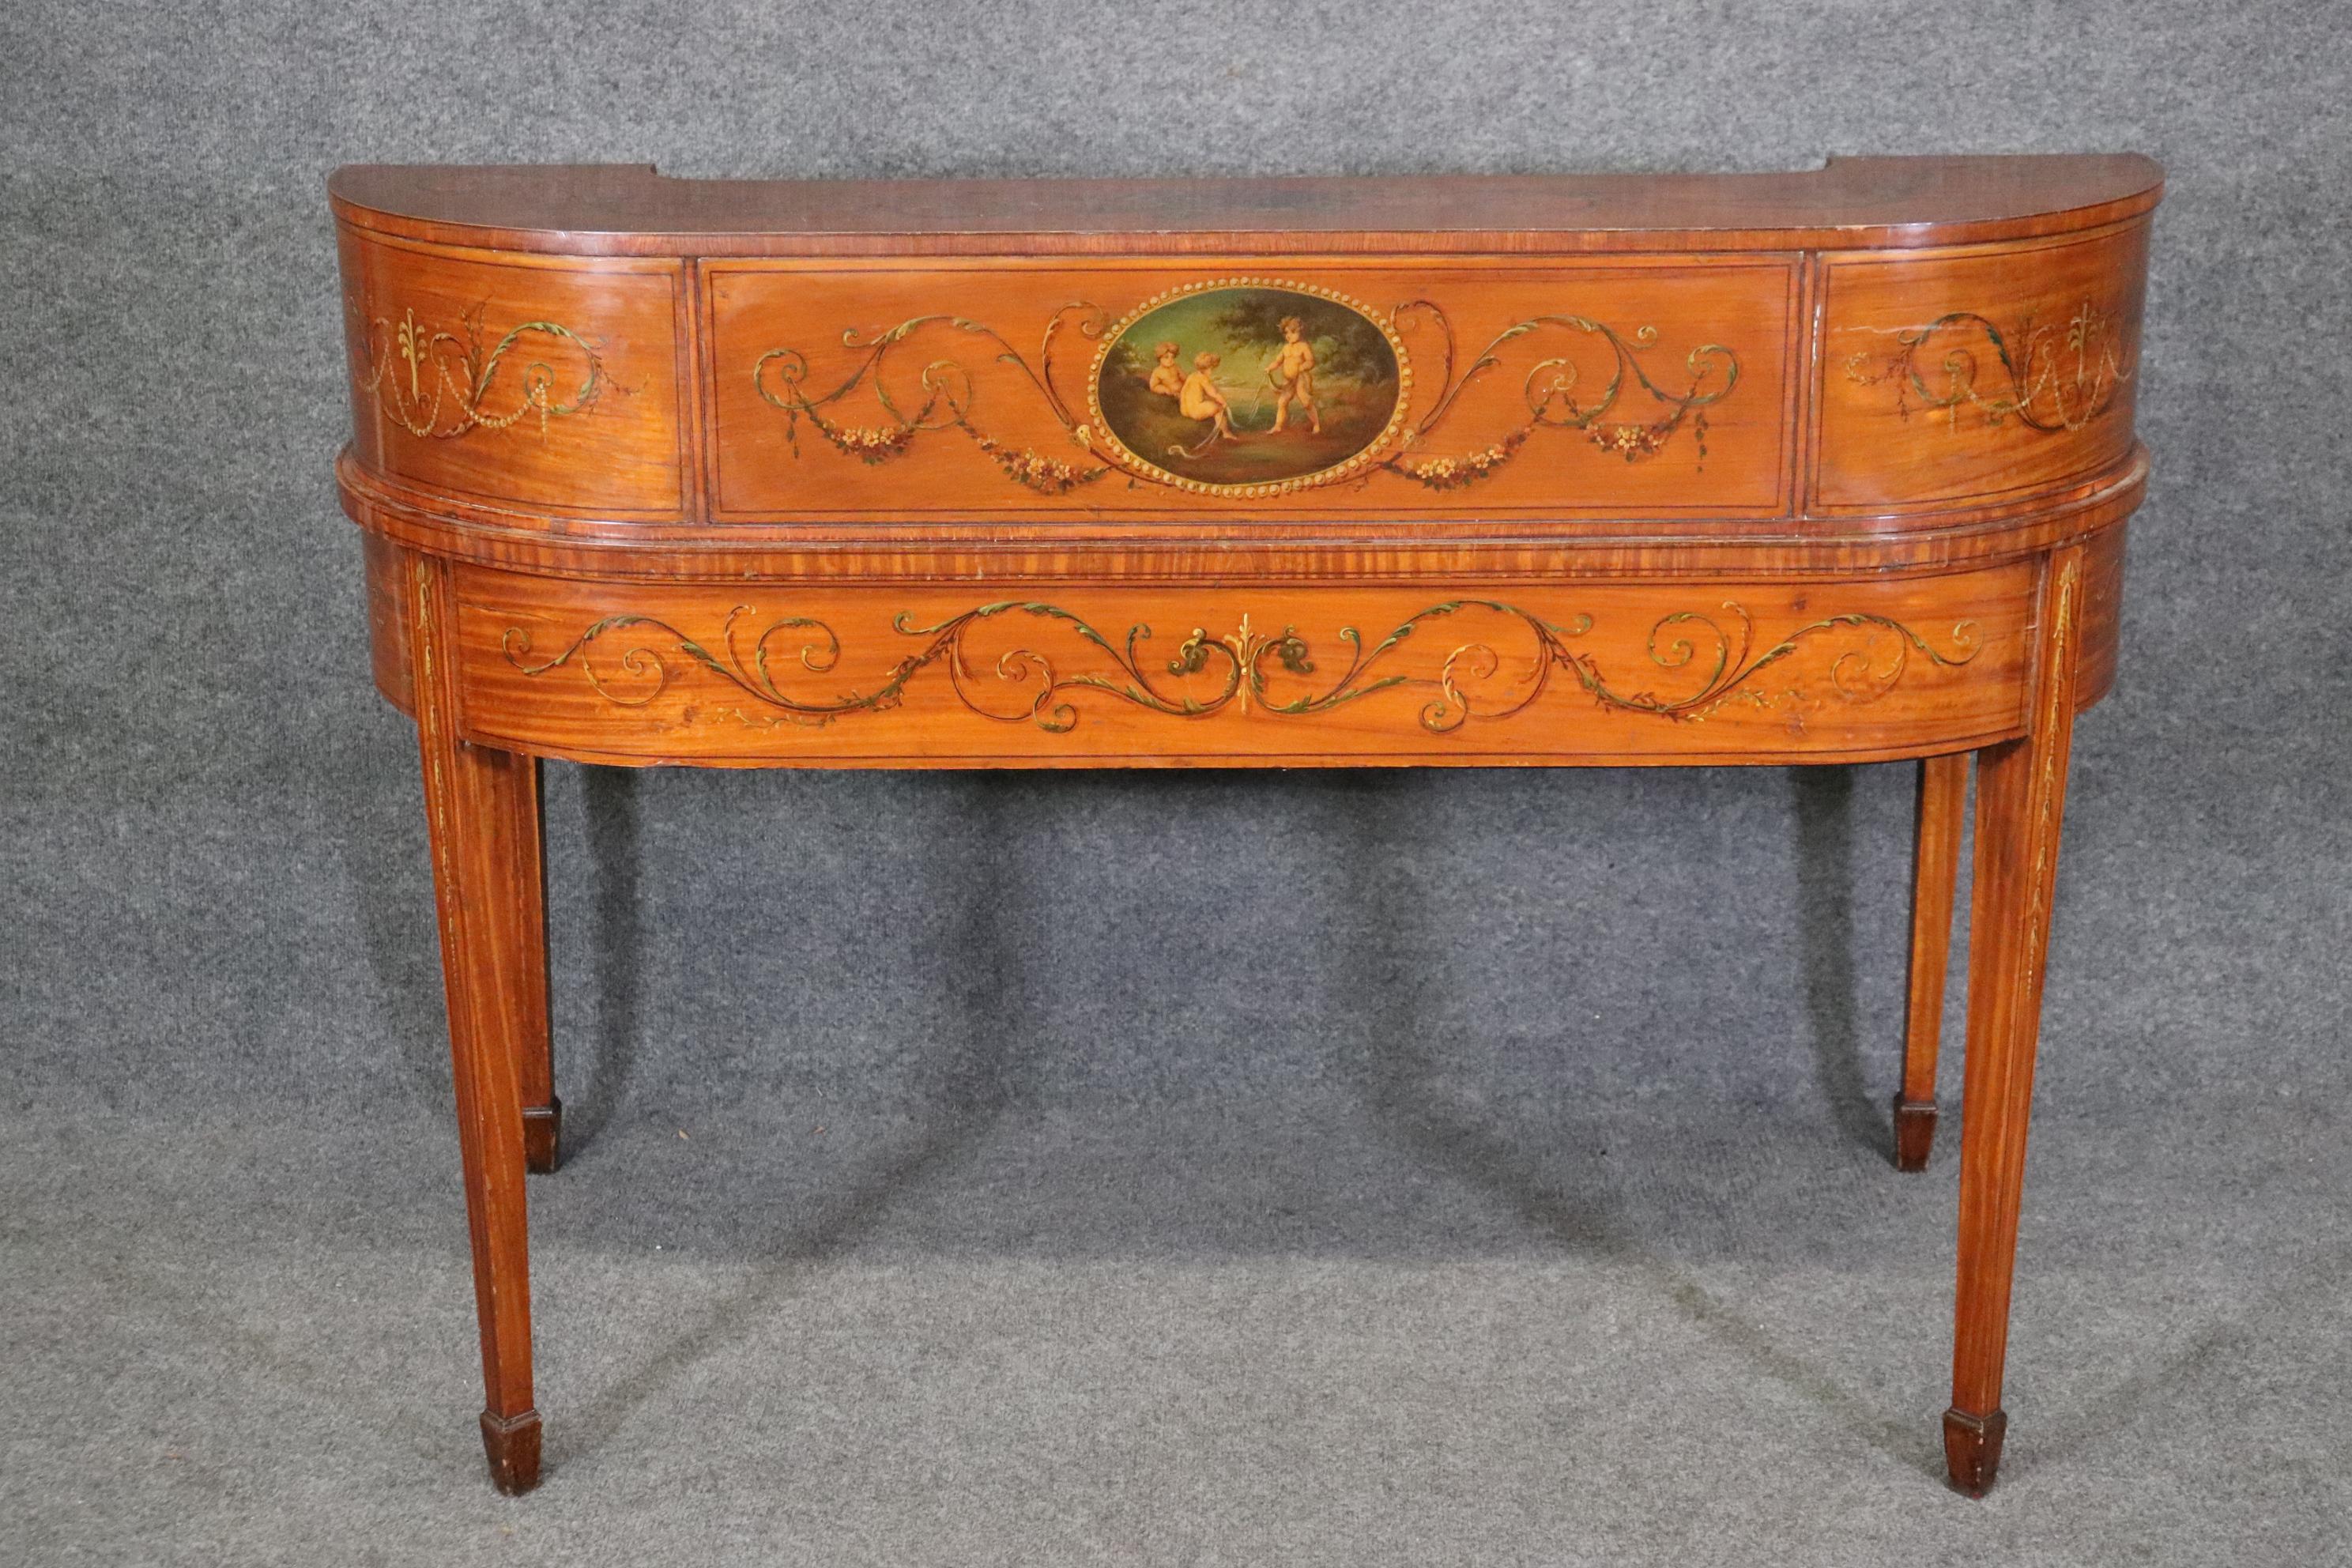 Fine Quality English Satinwood Carlton House Desk with Cherubs and Musical Theme 4